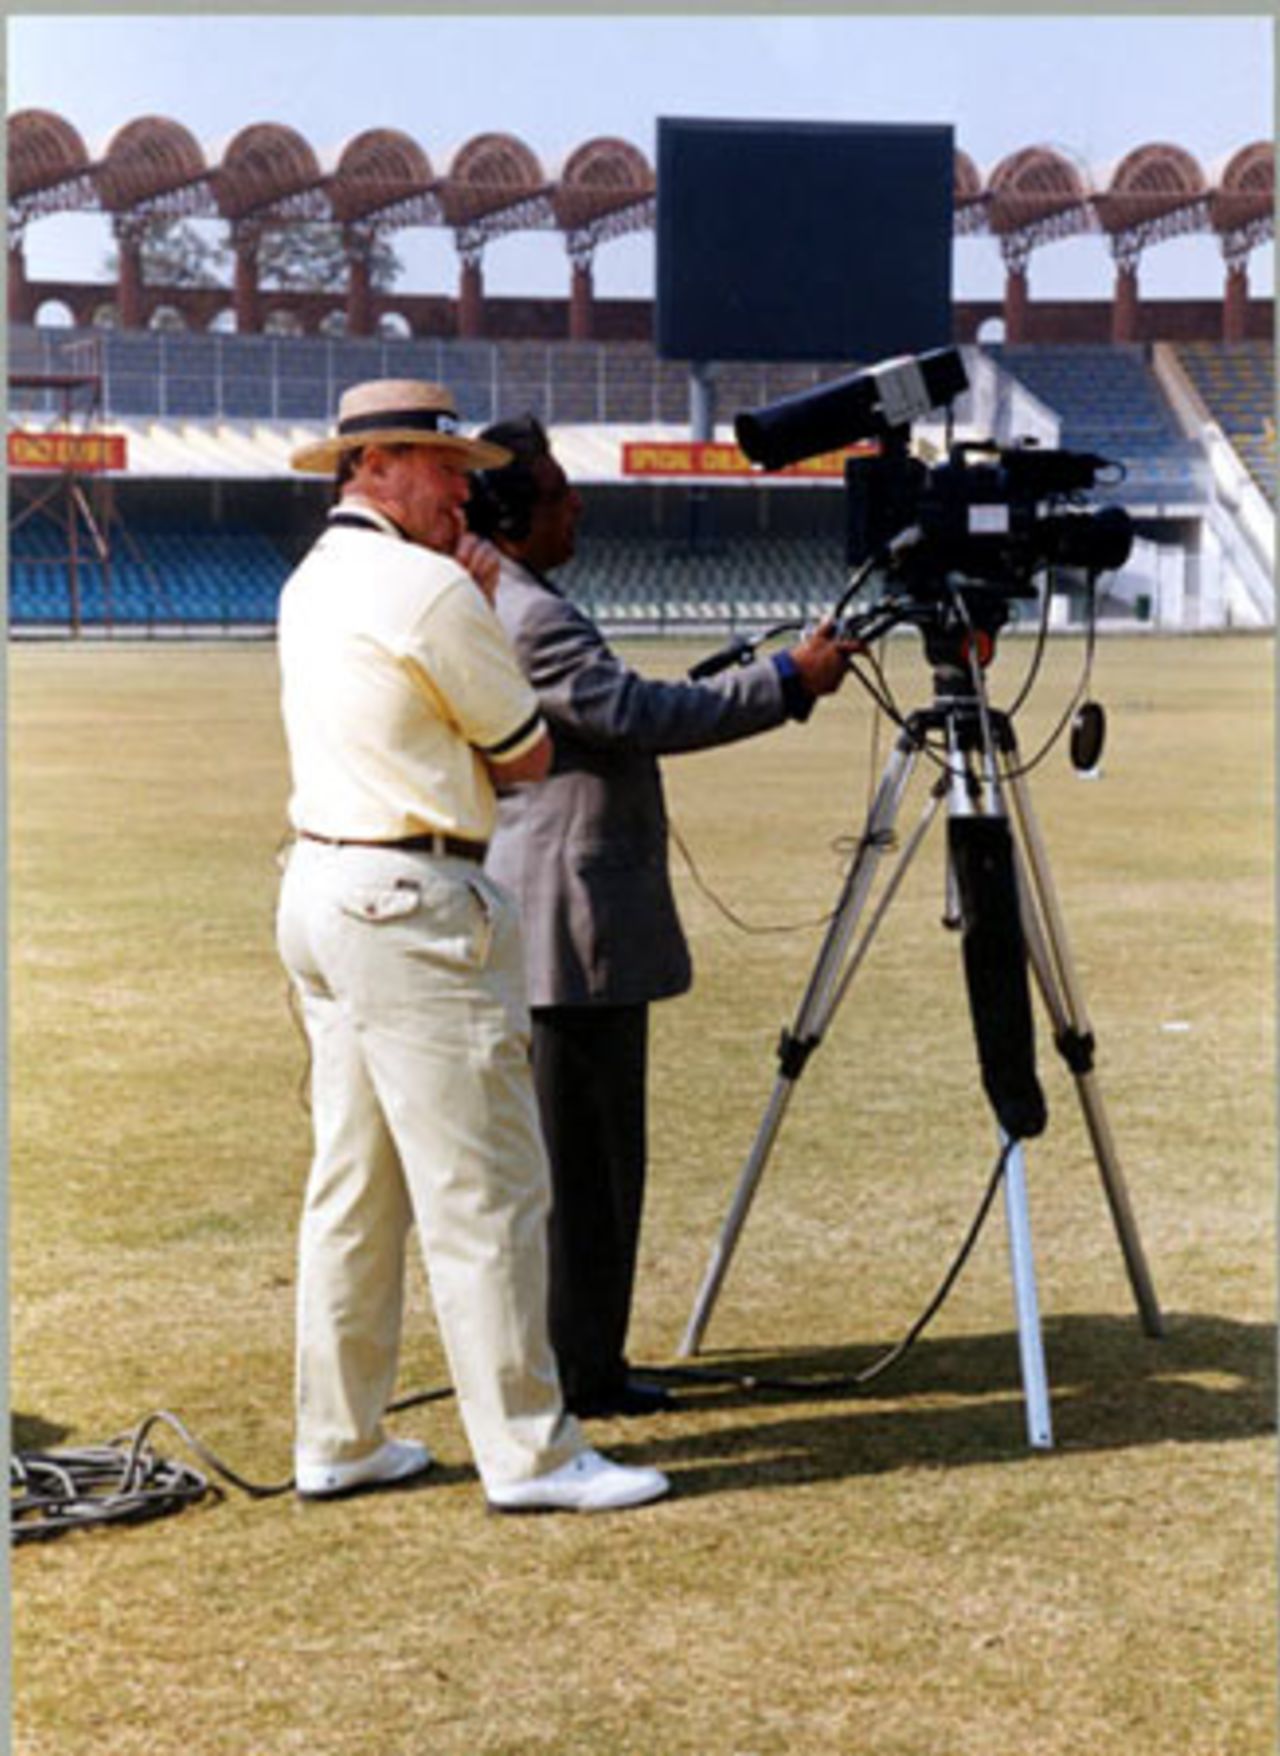 Geoff Boycott reviewing action video close-ups, Gaddafi Stadium Lahore, during the Feb 2001 coaching session